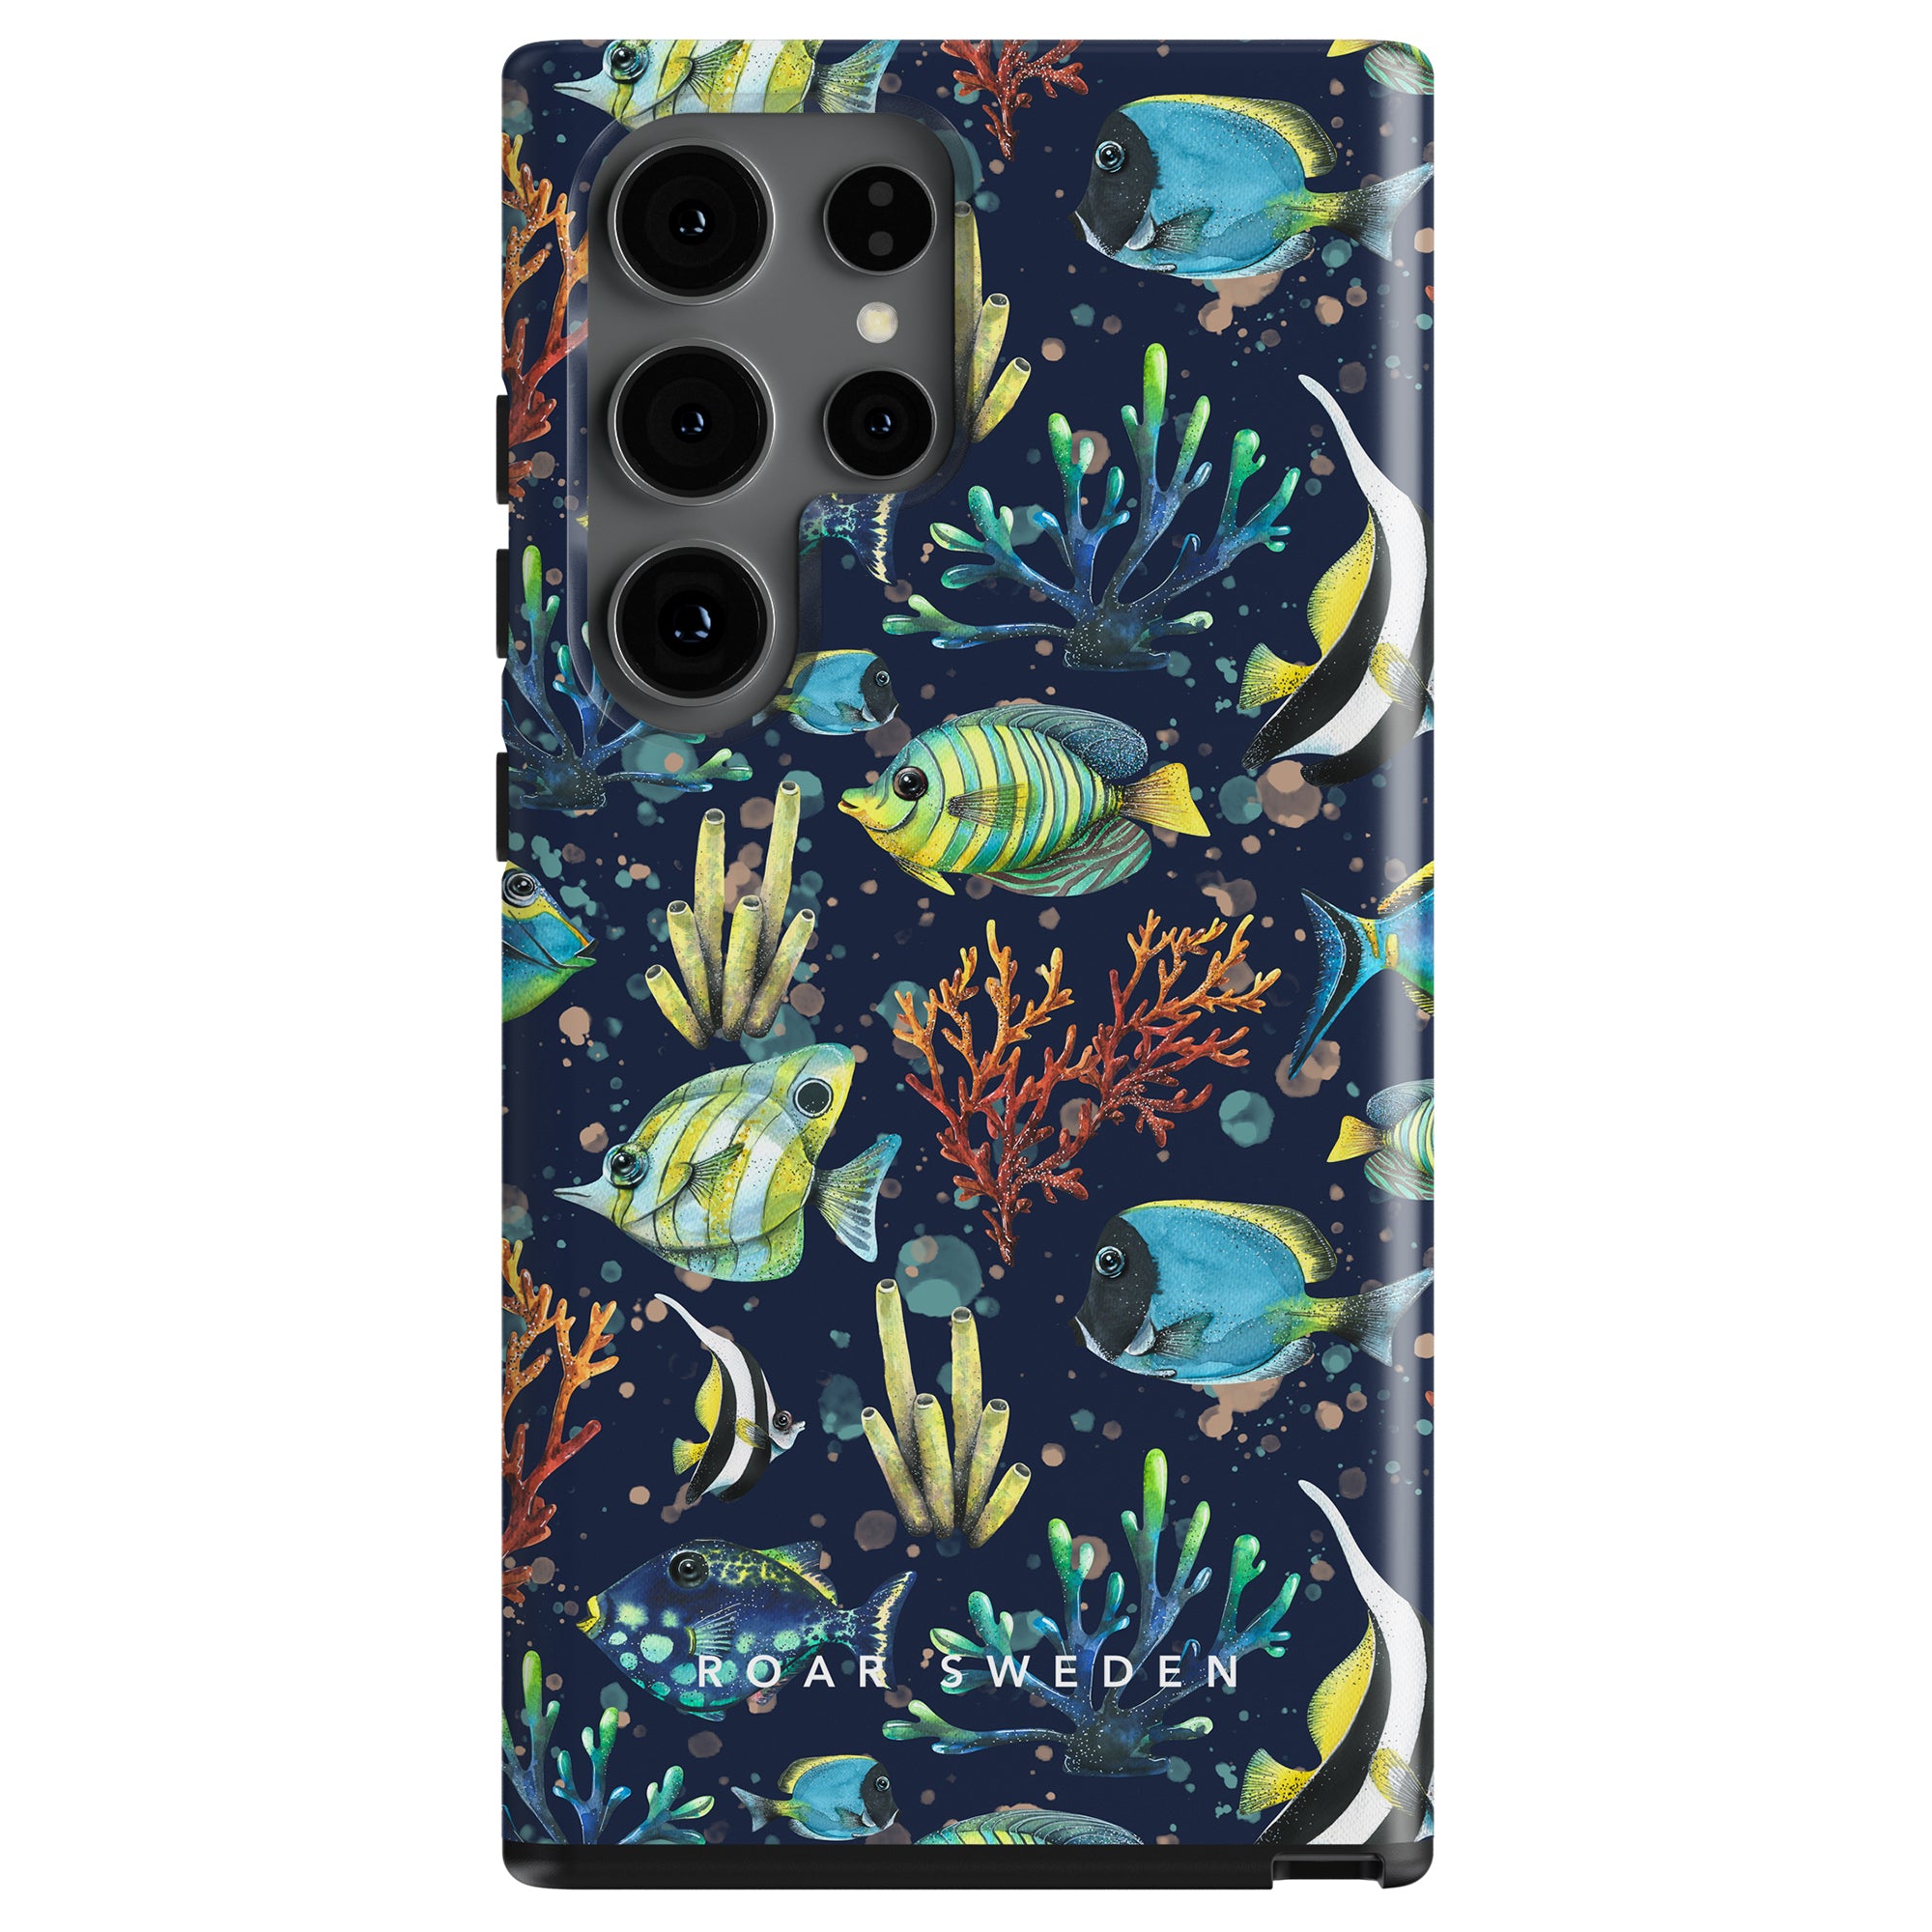 Tropical Fish - Tough Case with an underwater ocean theme, featuring tropical fish and coral designs.